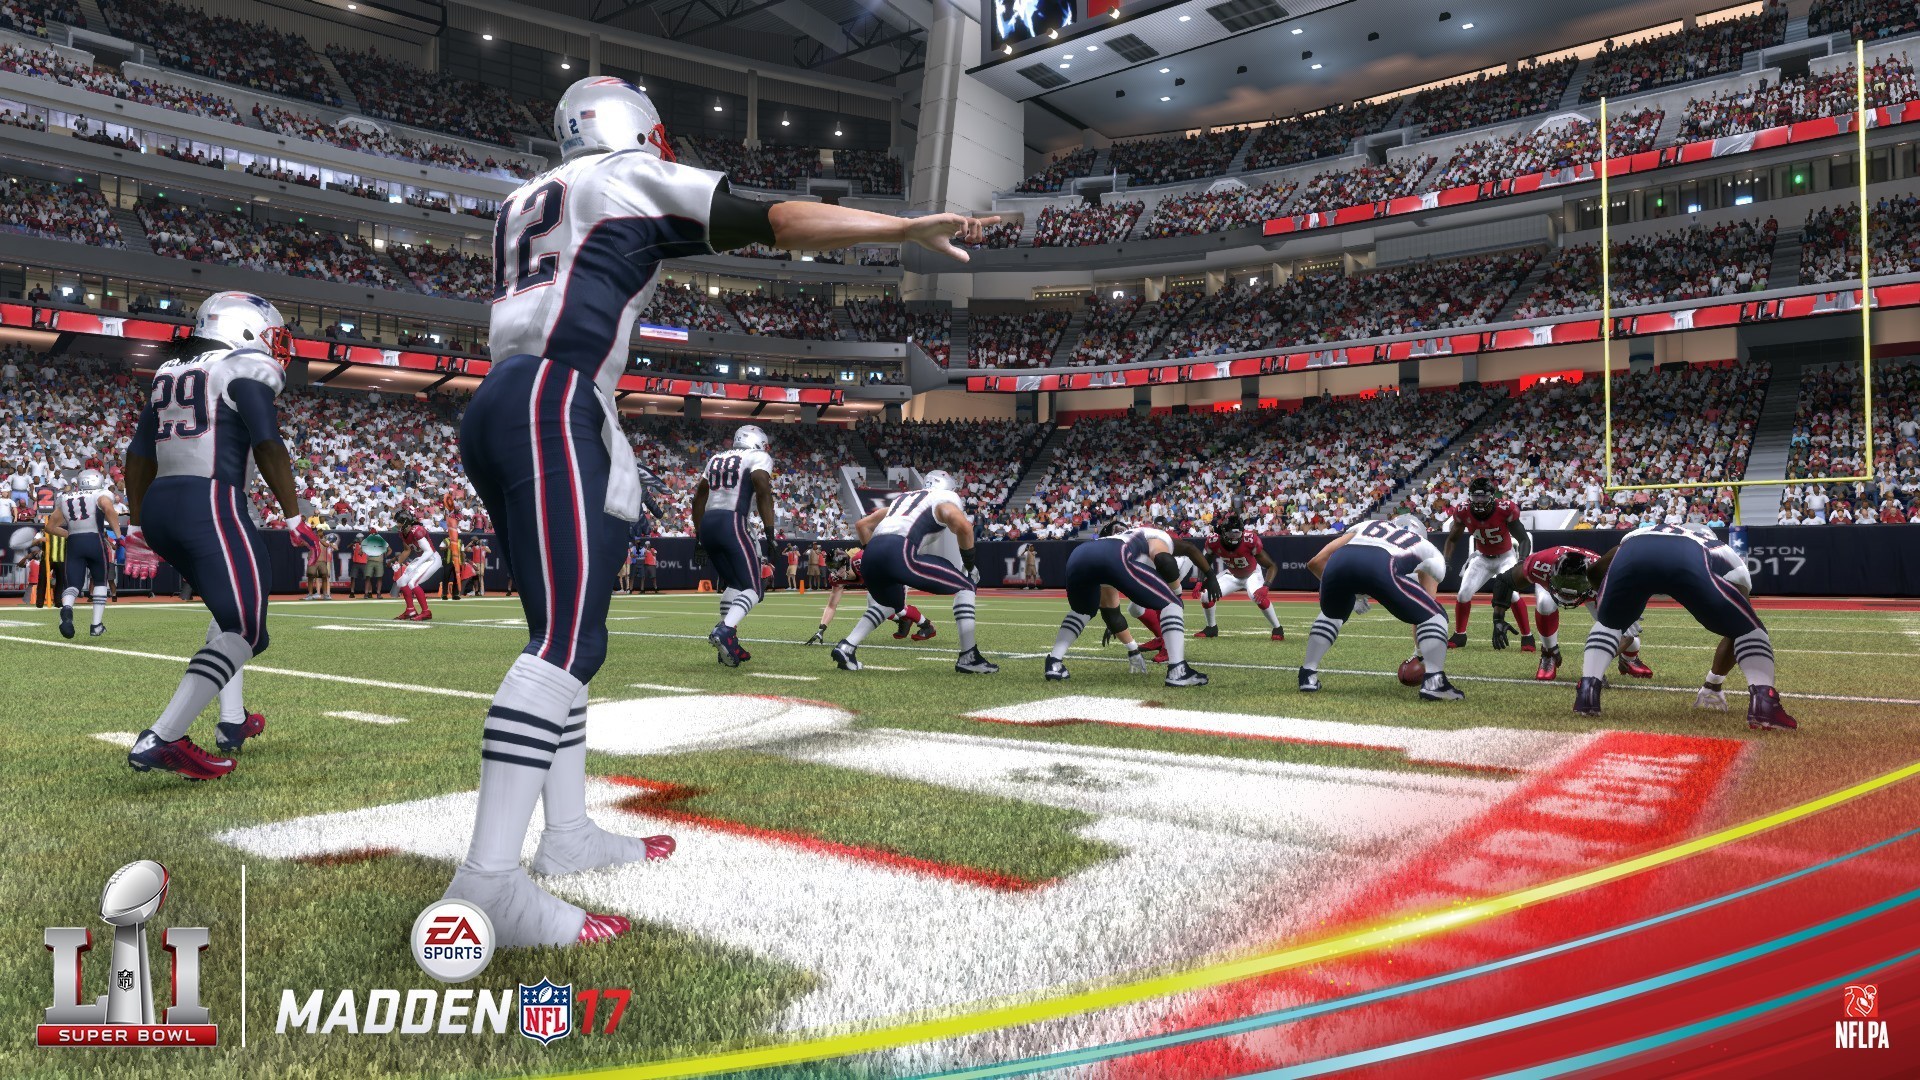 New england patriots win in official madden nfl super bowl li prediction business wire